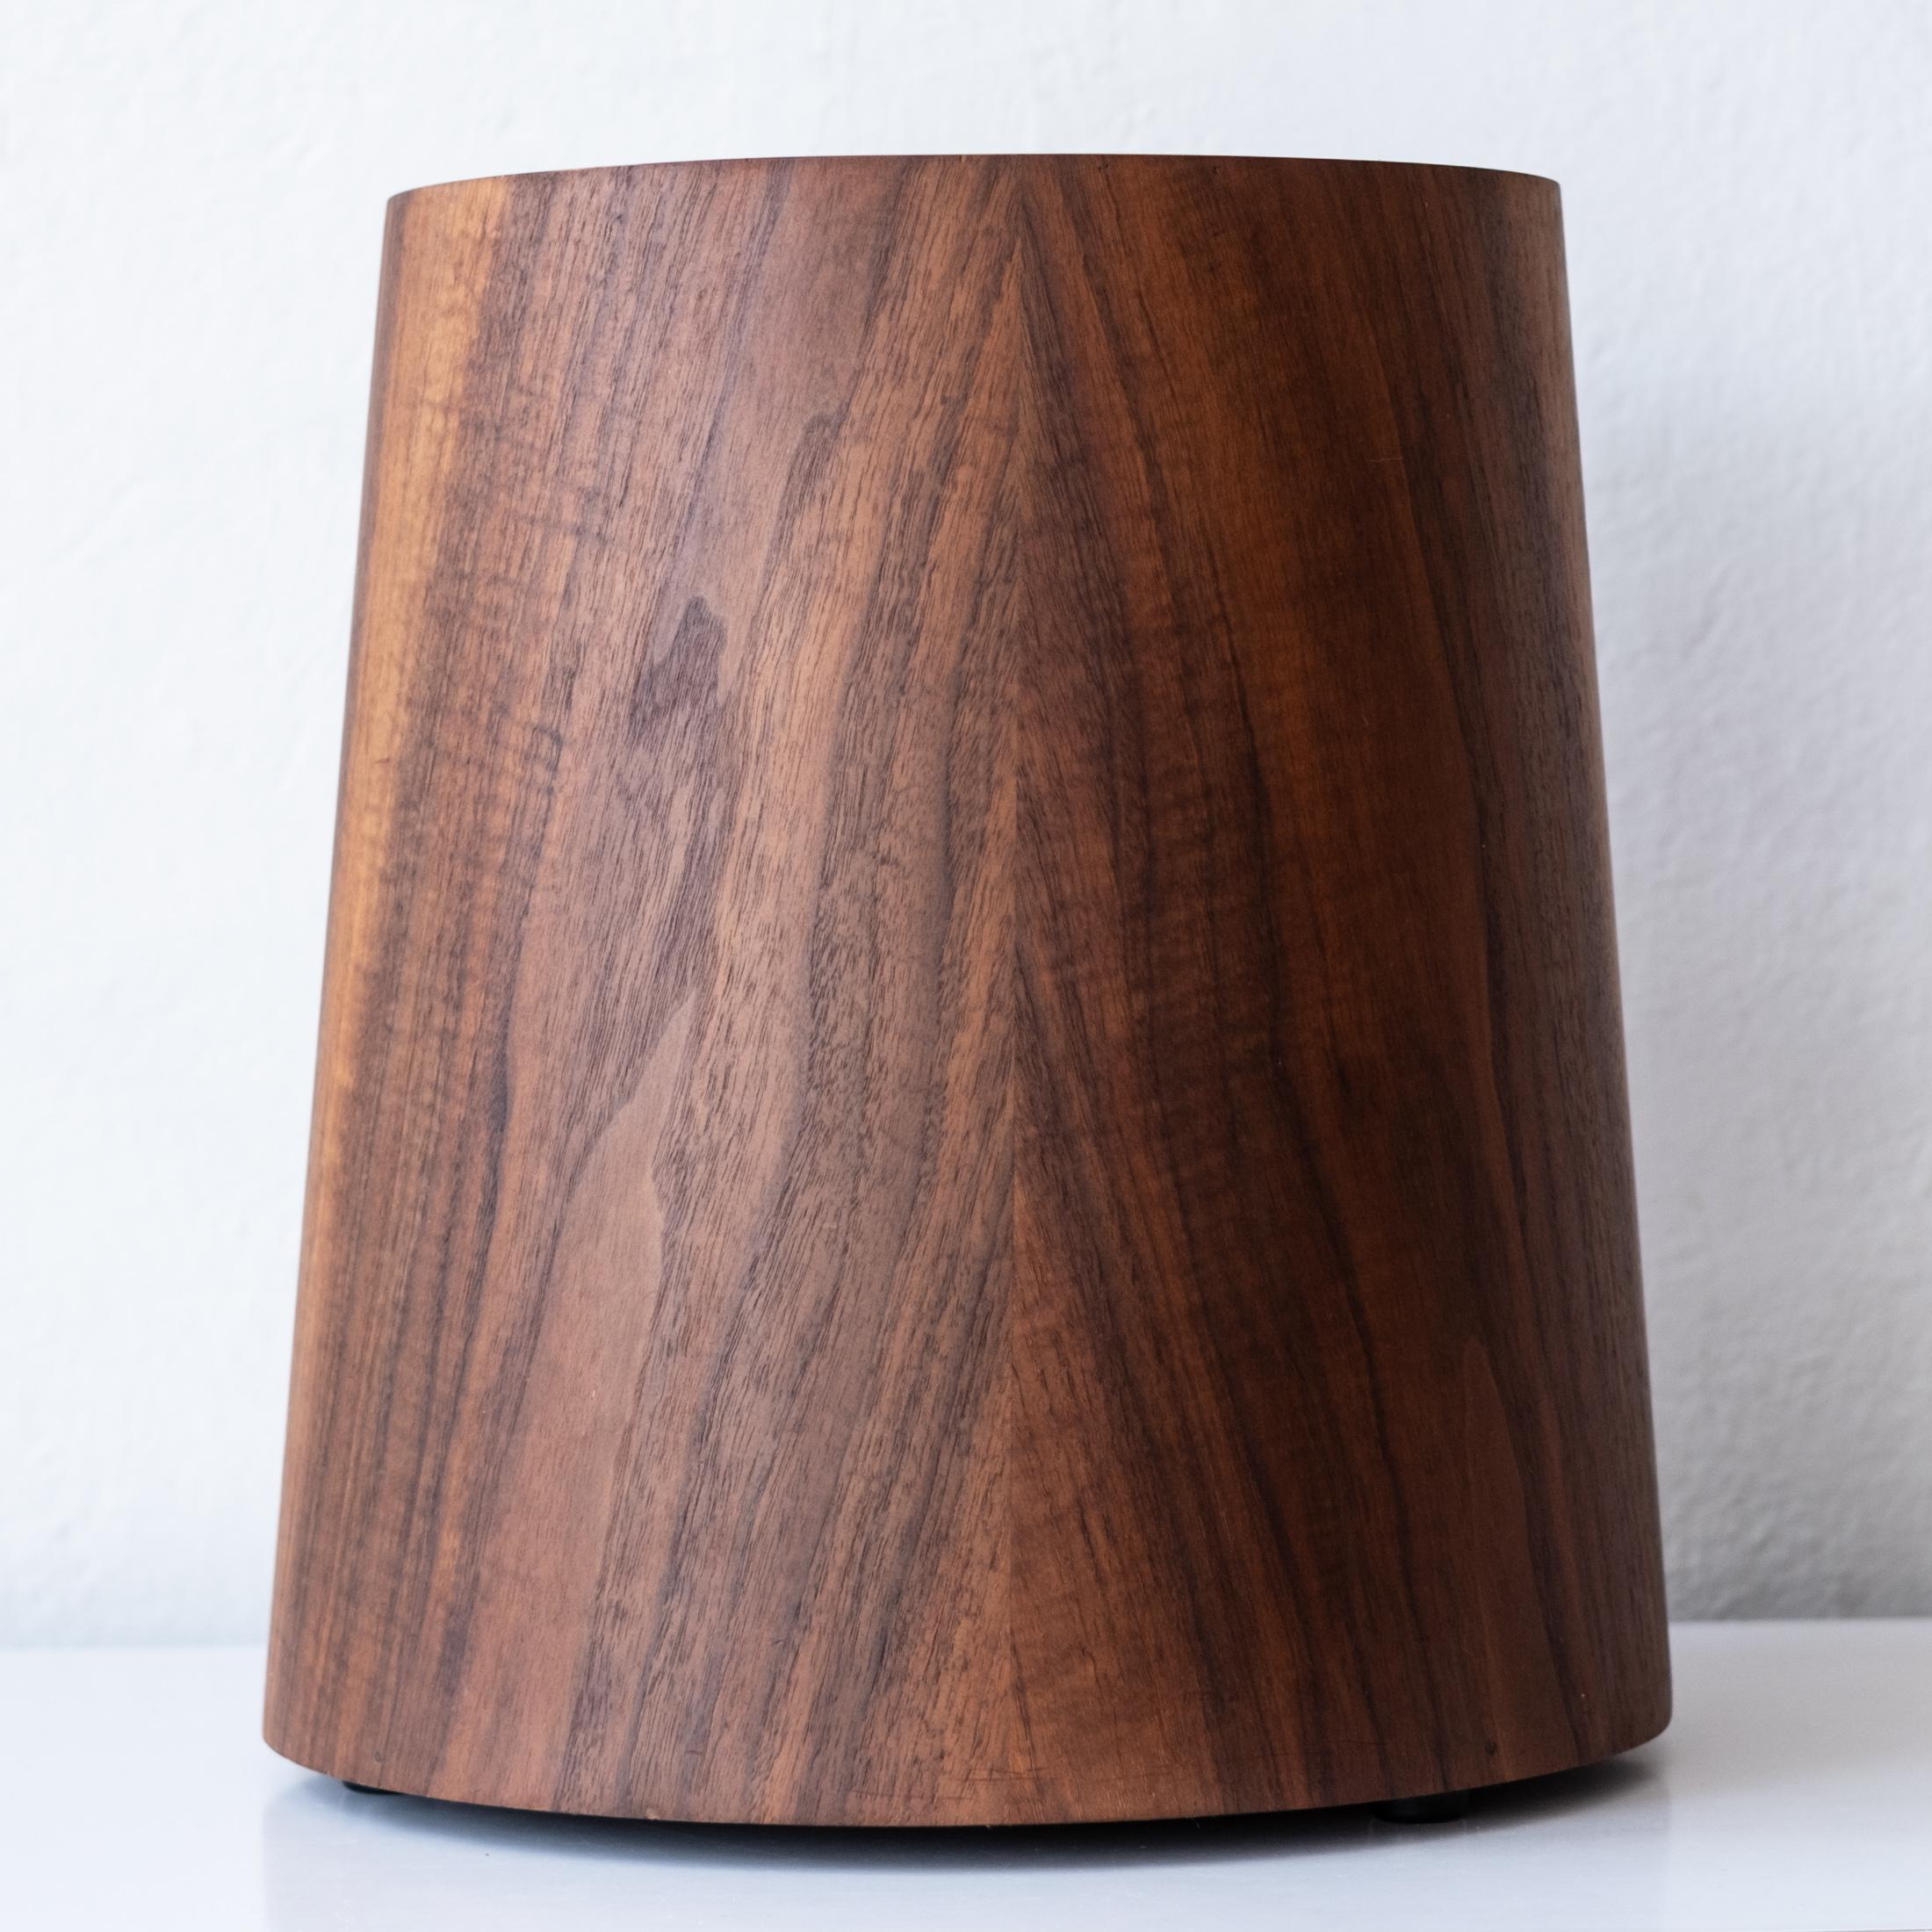 Jens Risom walnut trash can with aluminum lining from the 1950s. Original rubber feet. Beautiful grain.